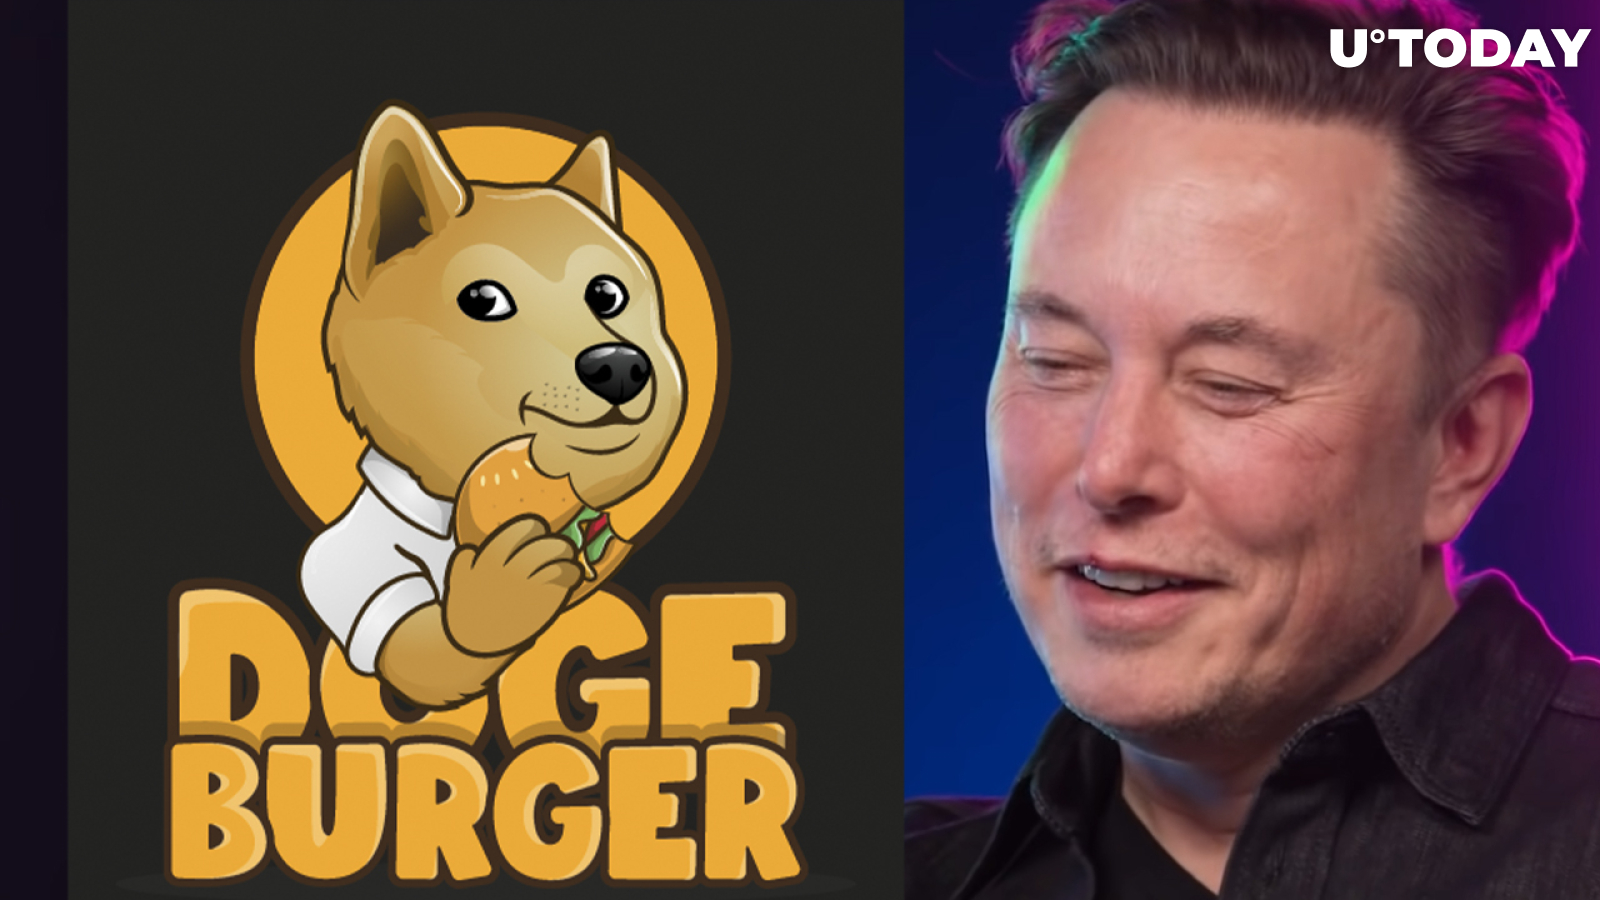 Elon Musk Might Eat at This Dogecoin Restaurant for Free, DOGE Creator Says